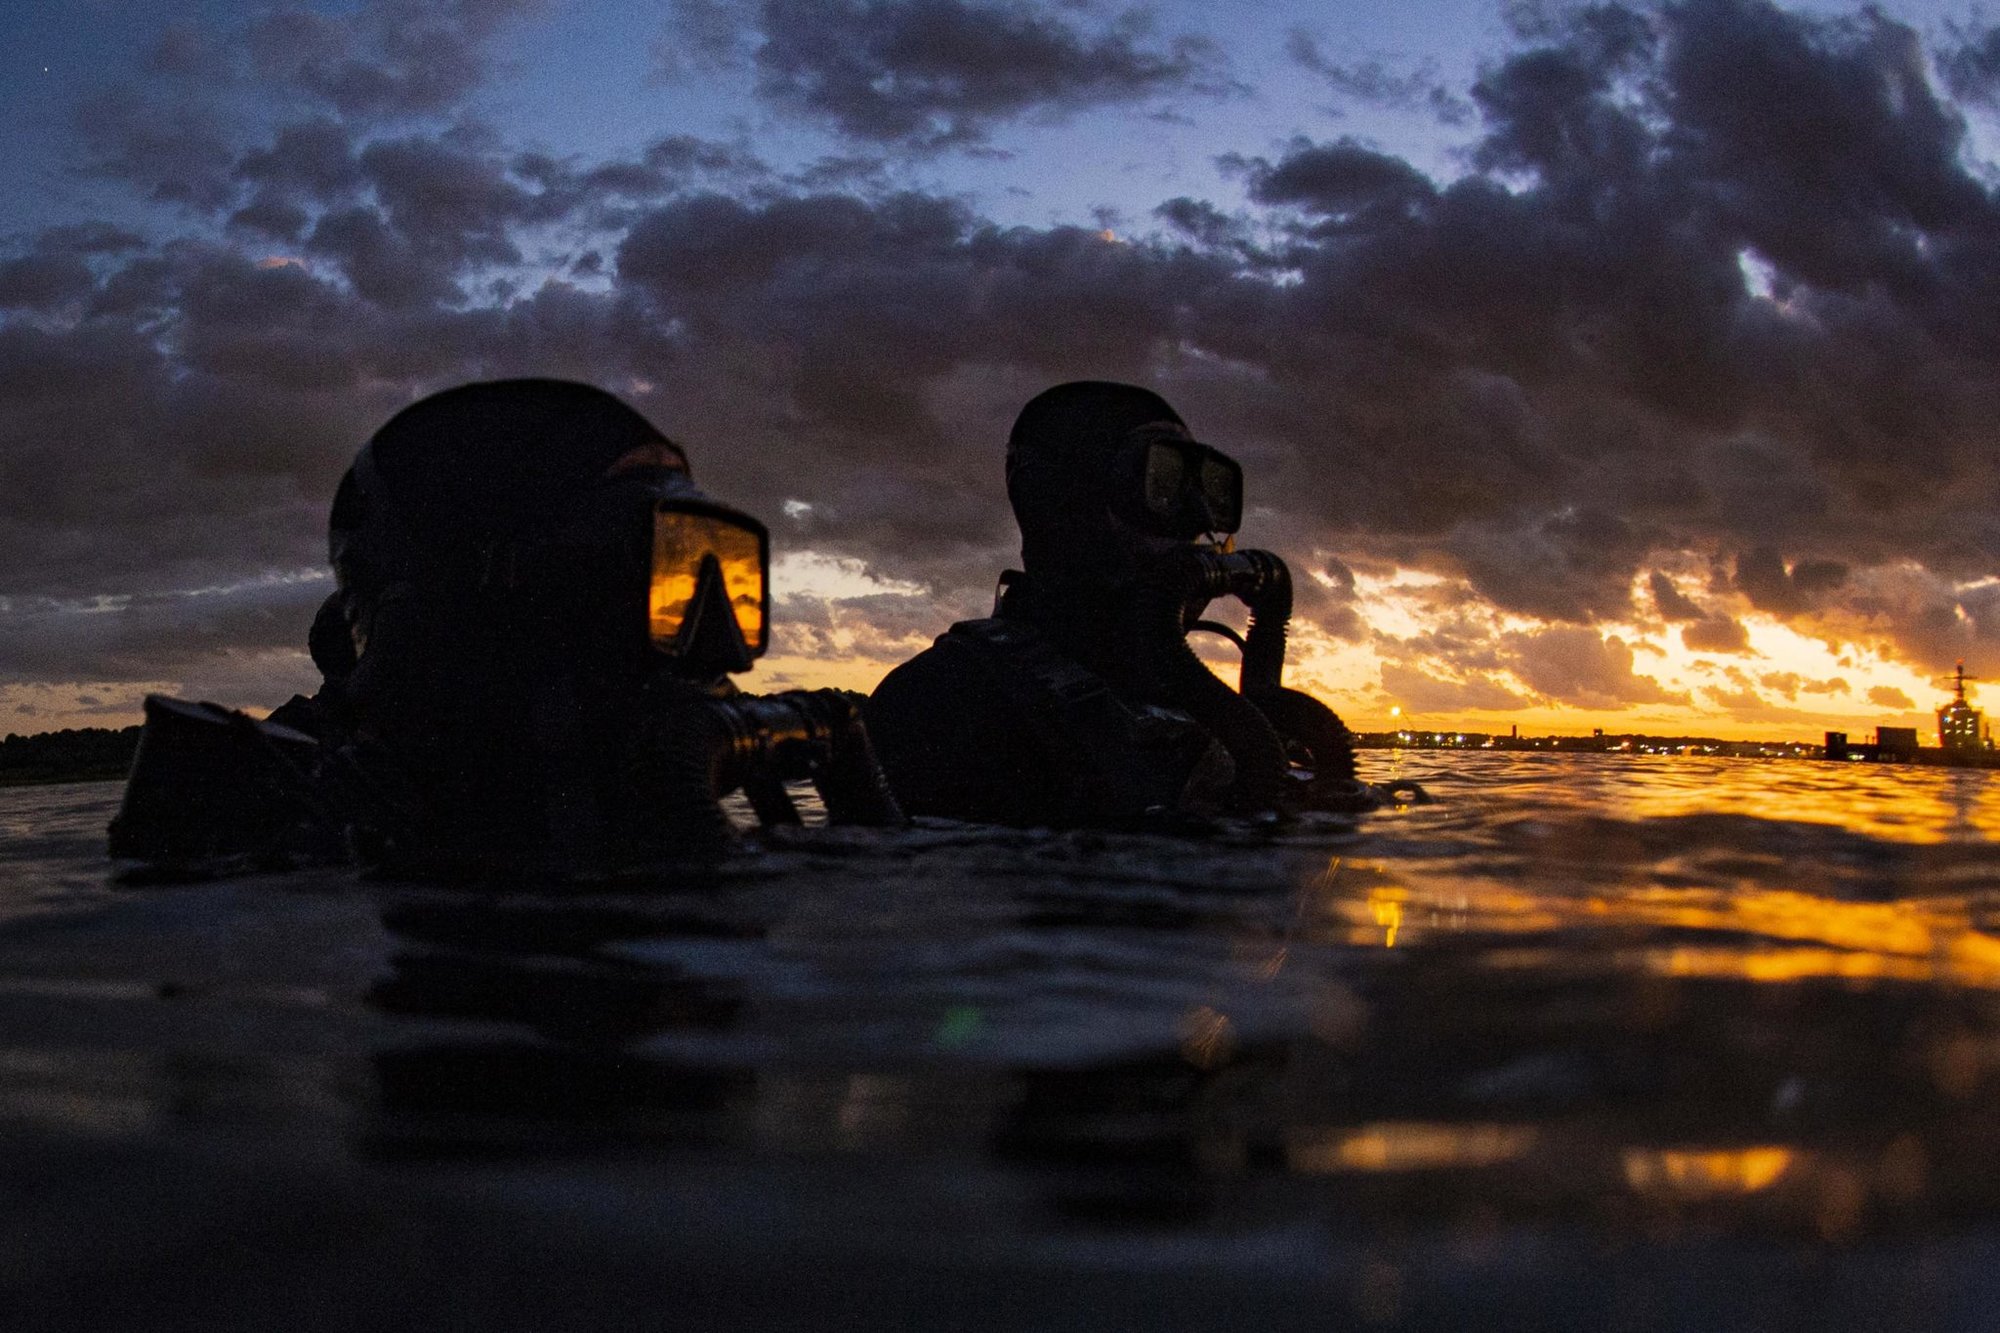 190918-N-XD935-0006 -ATLANTIC OCEAN (September 18, 2019) A member assigned to Naval Special Warfare Group 2 conducts military dive operations off the East Coast of the United States. Naval Special Warfare (NSW) invests in the training and development of sustainable capabilities, capacity and concepts to sharpen the competitive advantage of U.S. Navy Special Operation Forces (SOF). (U.S. Navy photo by Senior Chief Mass Communication Specialist Jayme Pastoric/RELEASED)